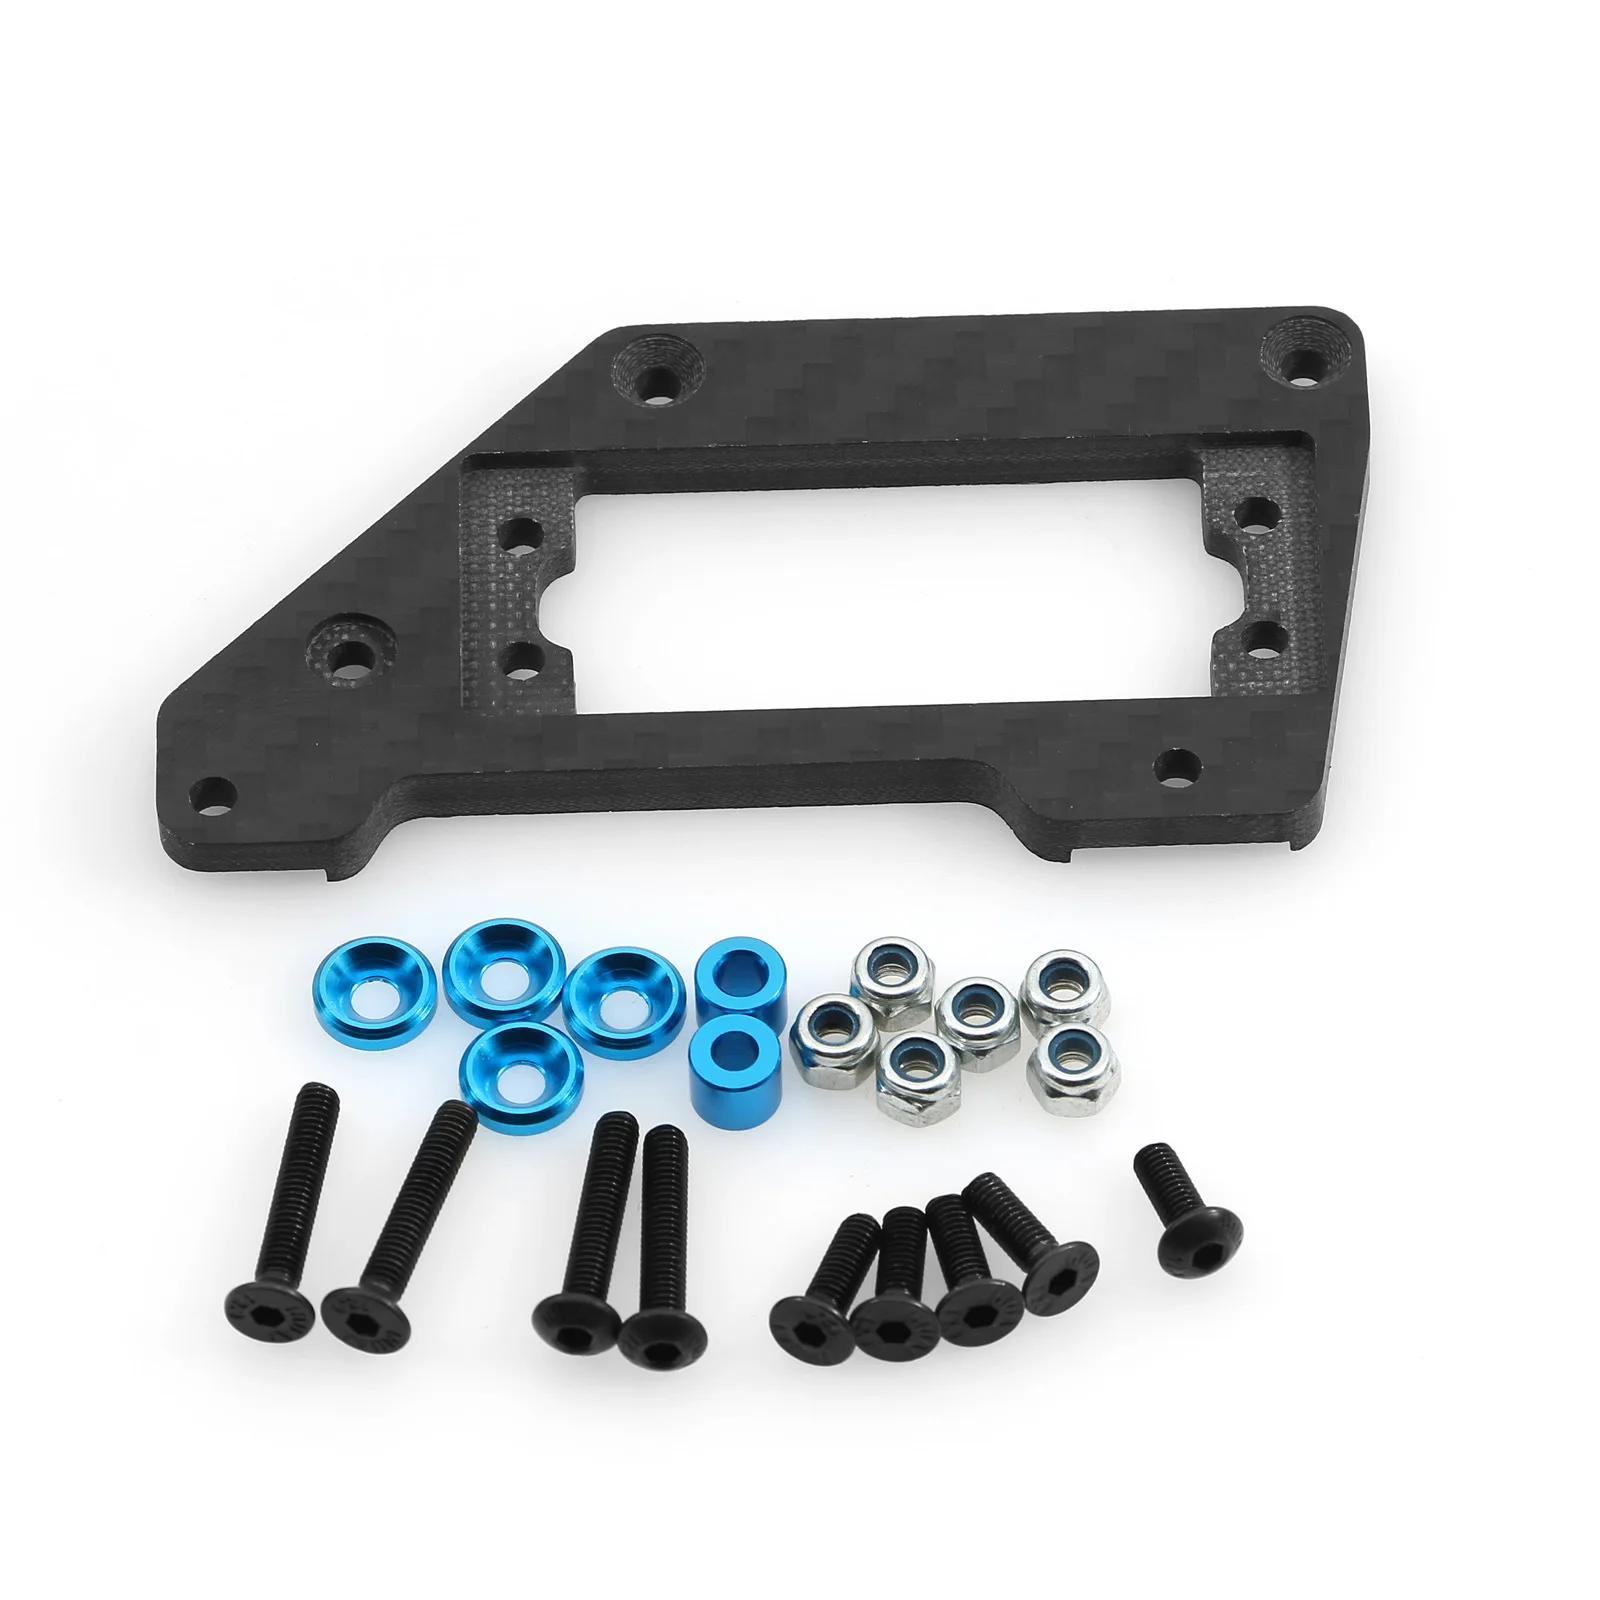 

Carbon Fiber Servo On Axle Mount Servo Mount Stand for Axial SCX10 PRO 1/10 RC Crawler Car Upgrade Parts Accessories